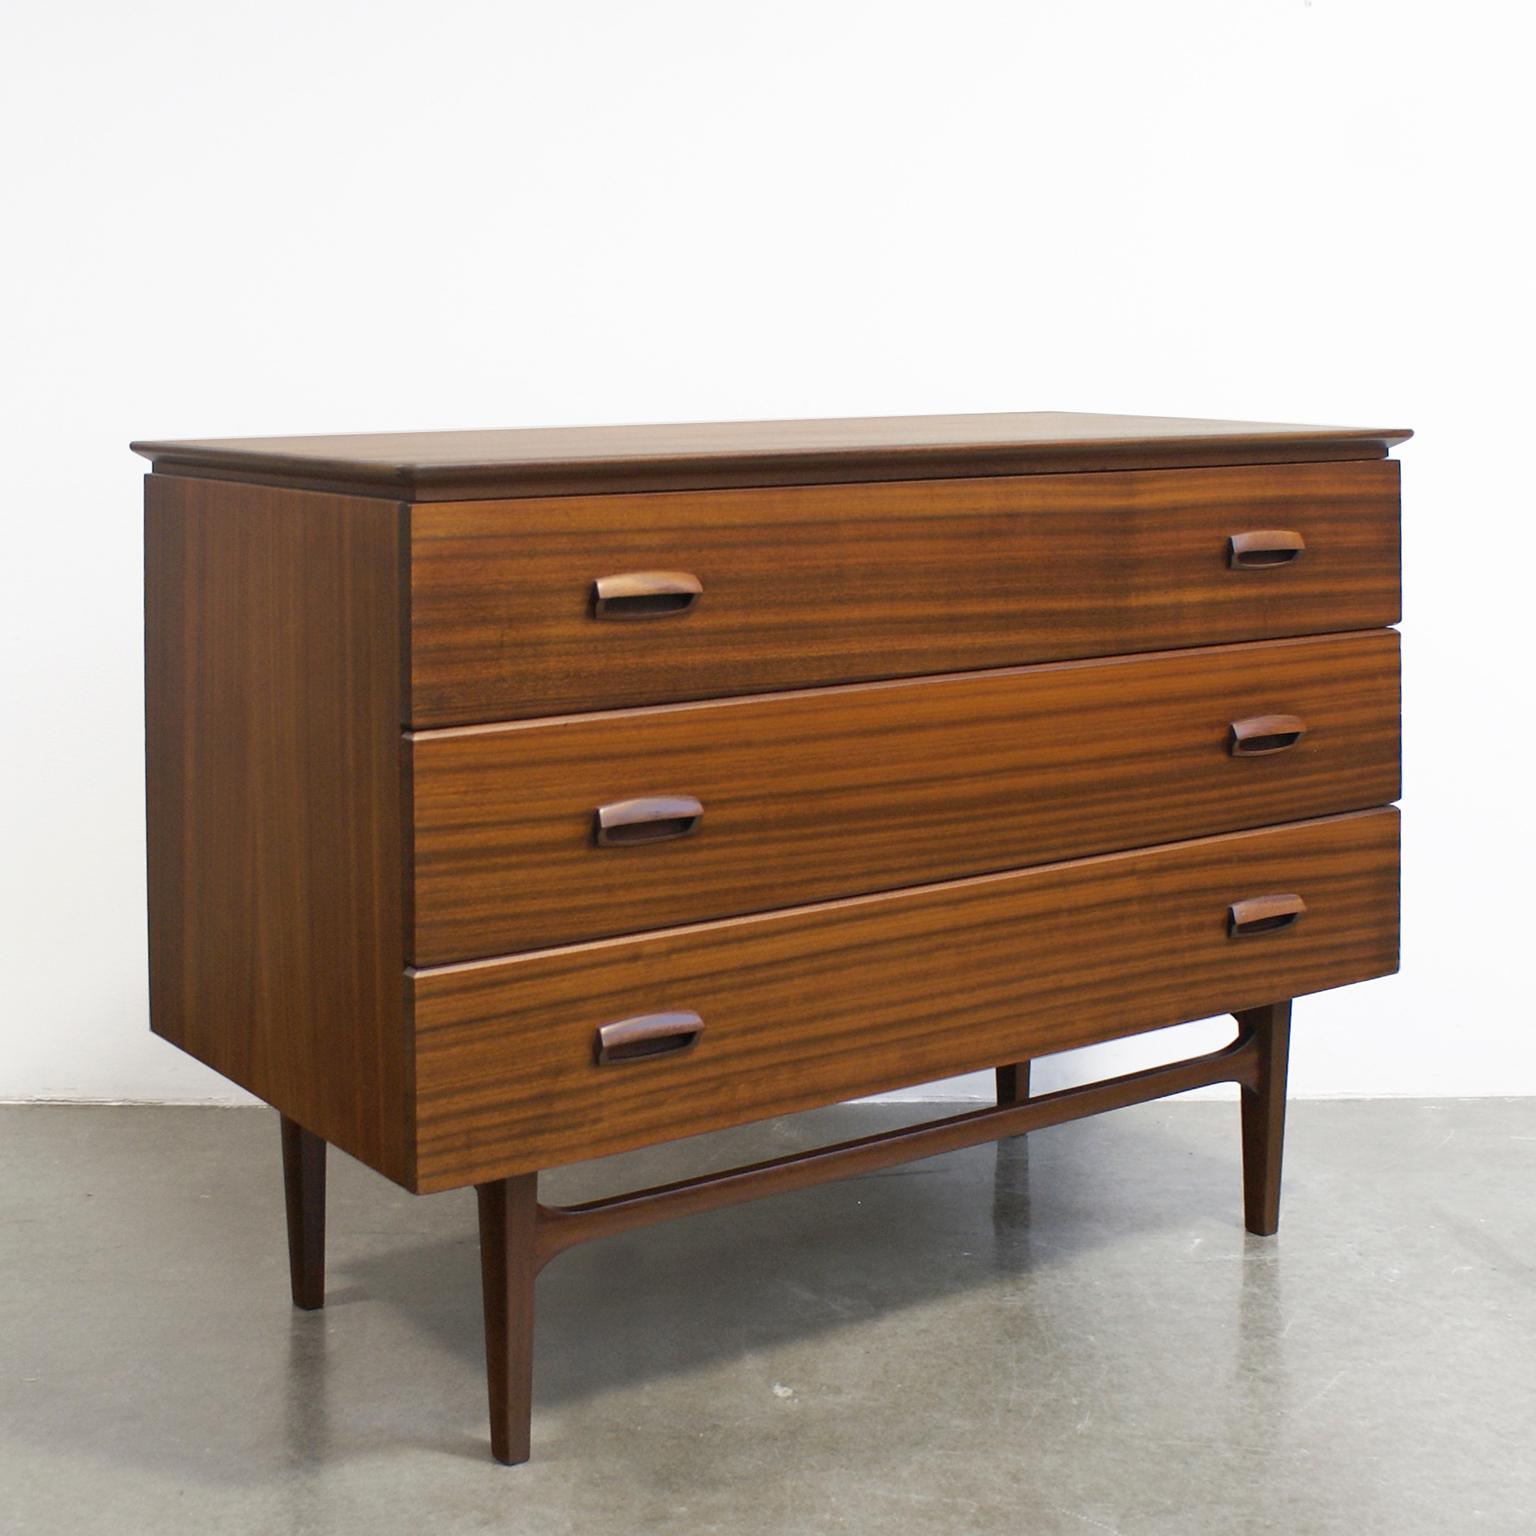 1960s modern Portuguese chest of drawers from Olaio Portuguese factory. This piece was designed by José Espinho and belongs to 